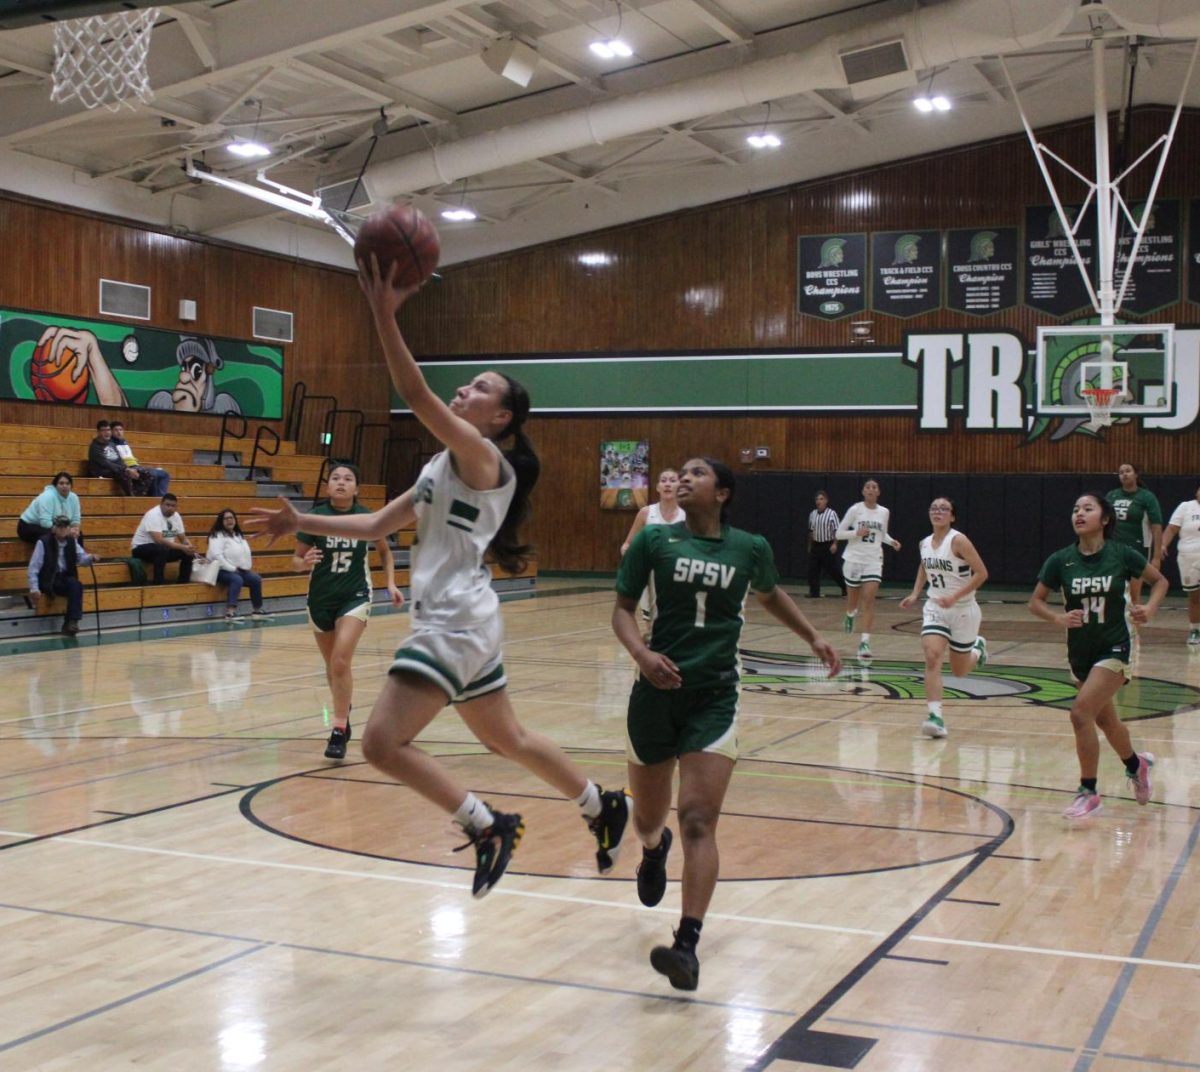 Against St. Patrick-St. Vincent, senior Lesly Rodriguez soars in for a layup. Unfortunately, the Trojans came up short, losing 43-51. 